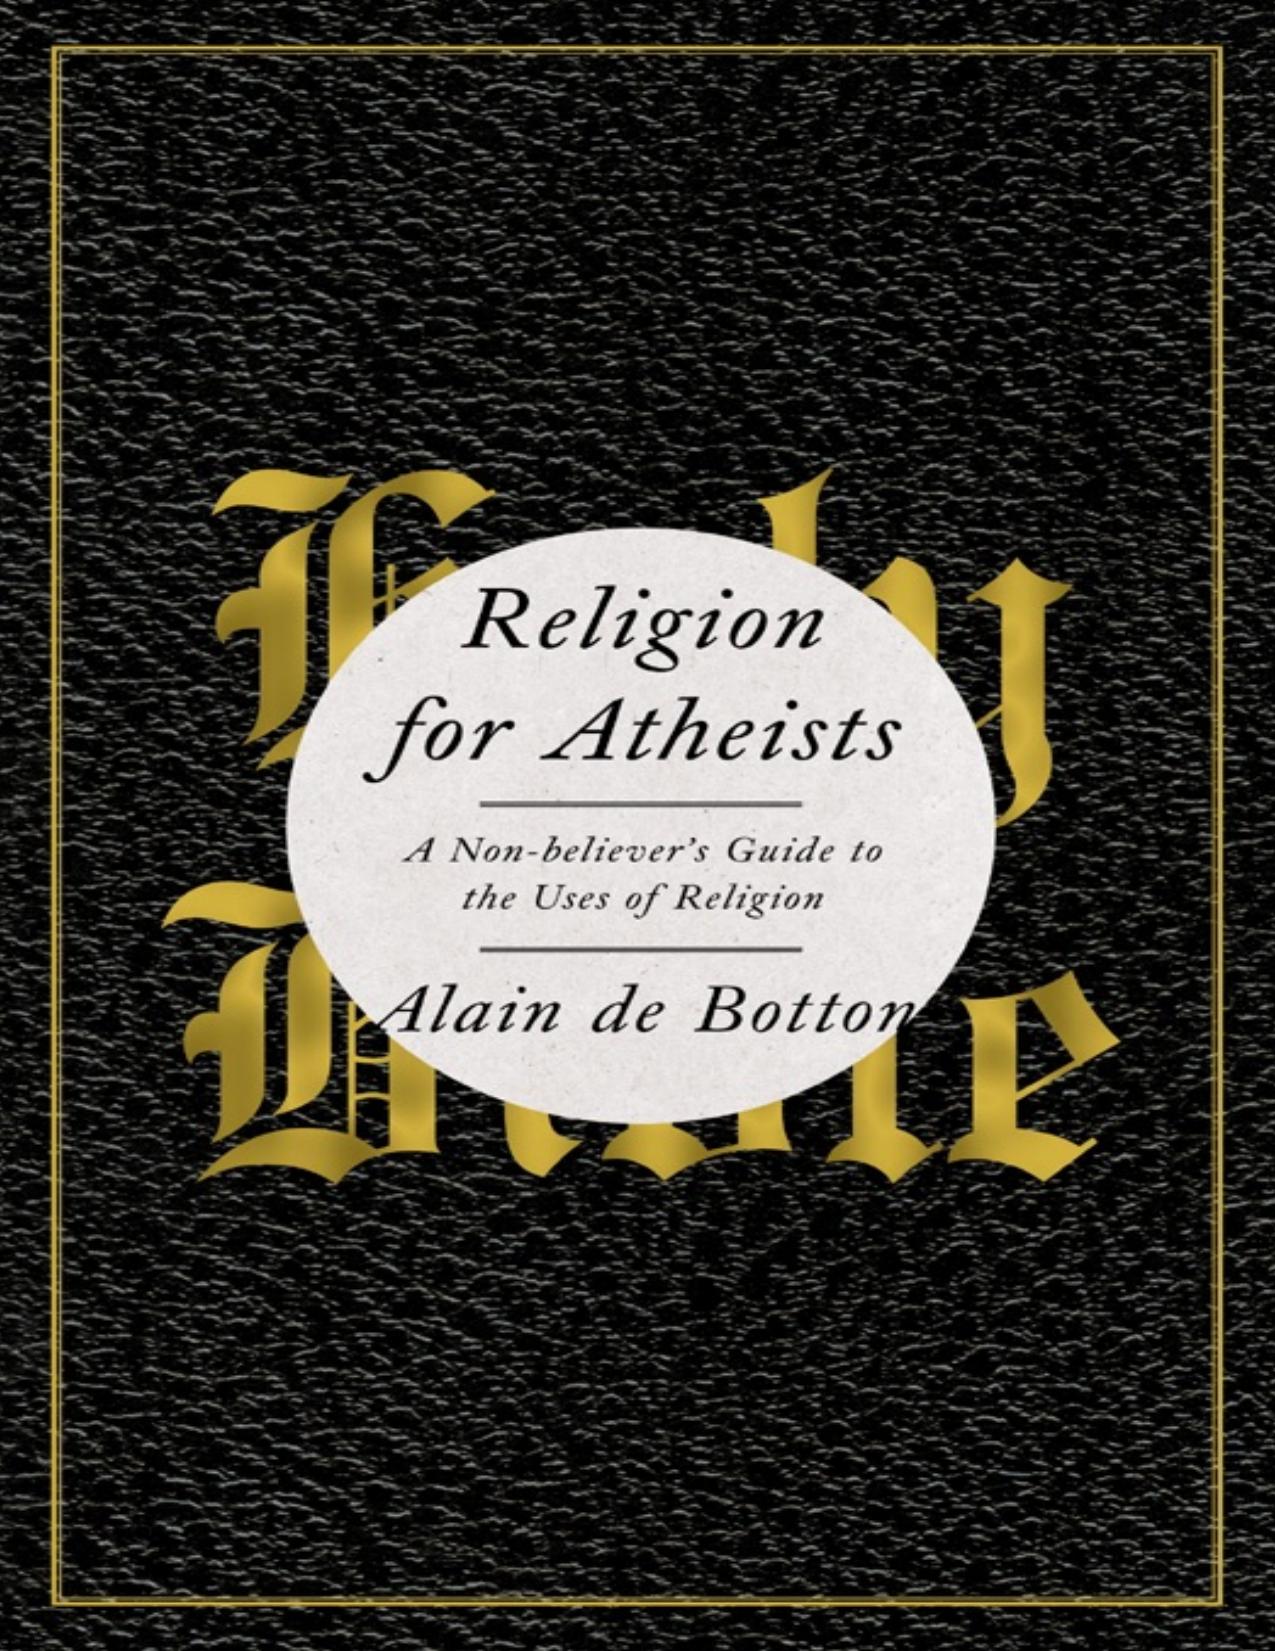 Religion for Atheists: A Non-Believer\'s Guide to the Uses of Religion - PDFDrive.com